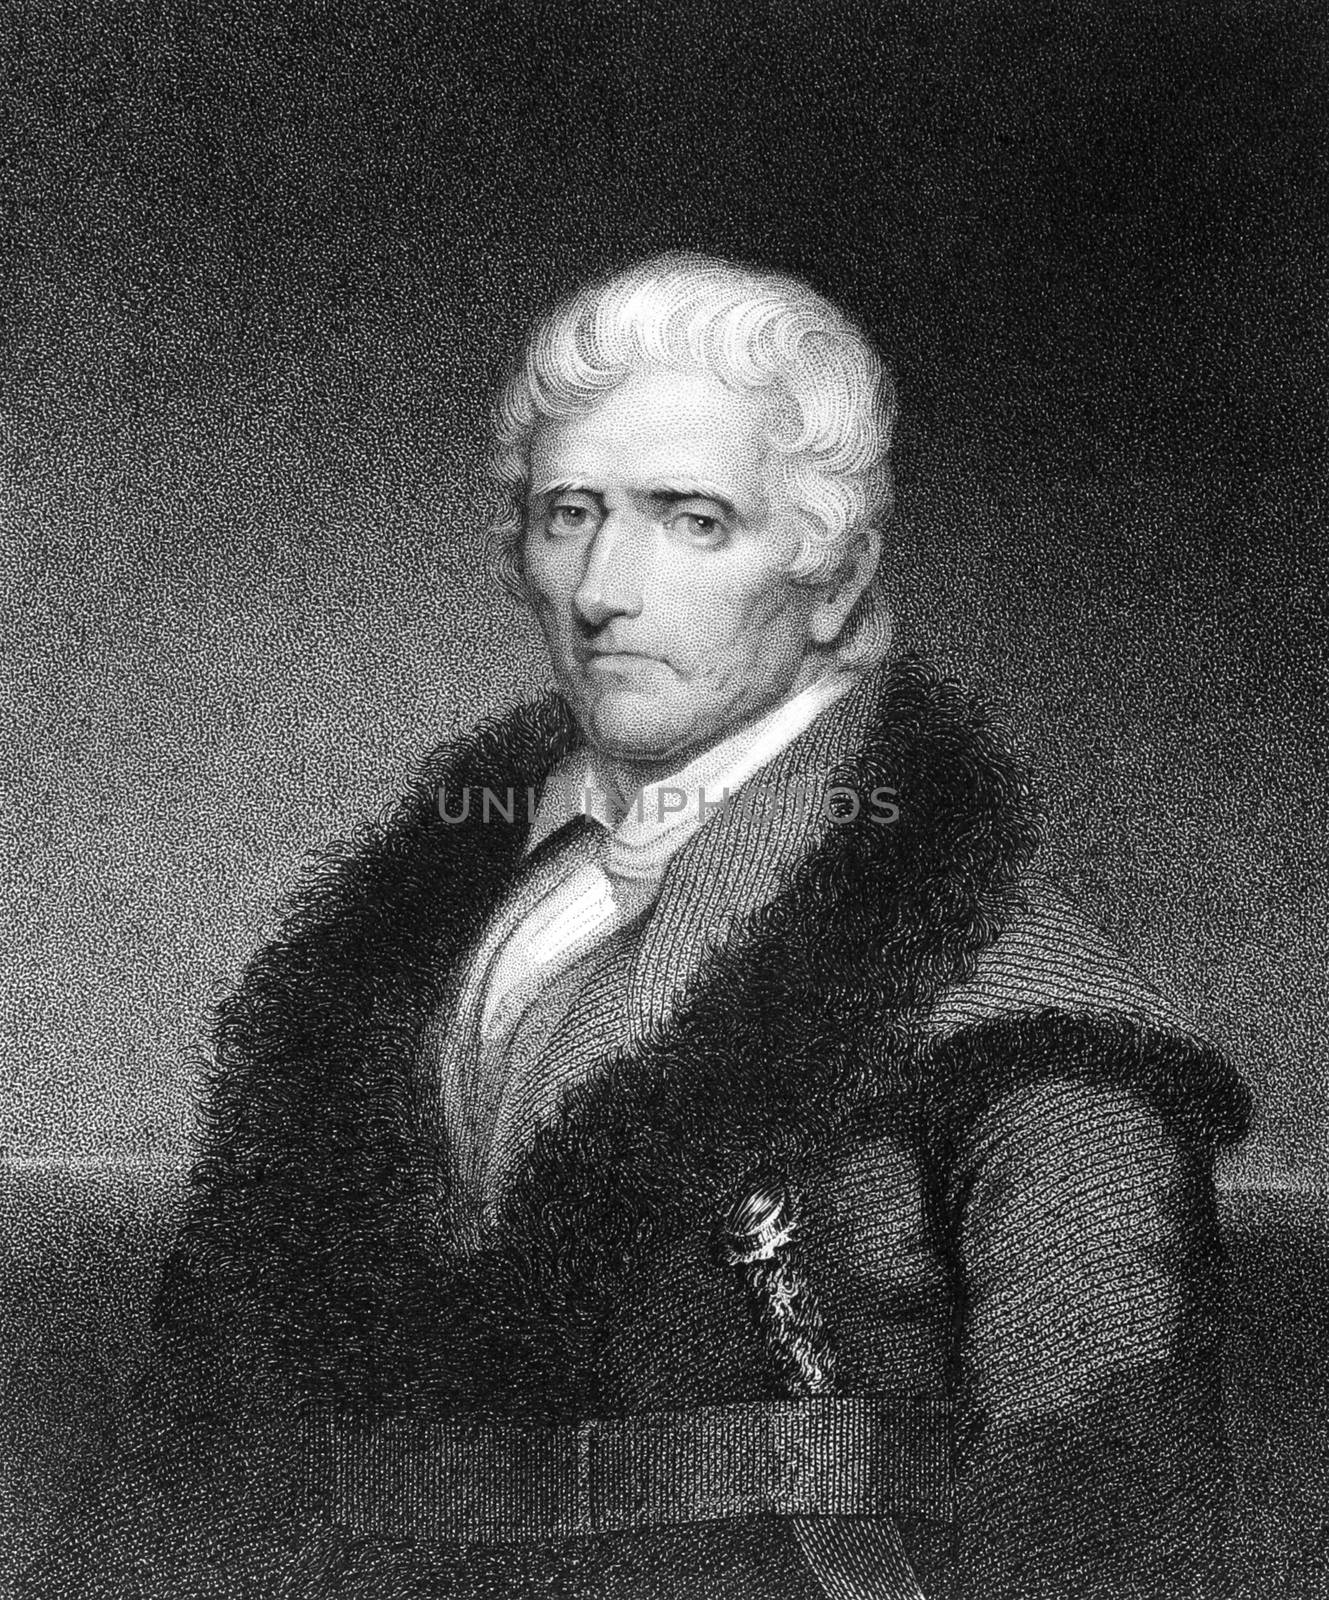 Daniel Boone (1734-1820) on engraving from 1835. American pioneer, explorer, and frontiersman. Engraved by J.B.Longacre and published in''National Portrait Gallery of Distinguished Americans Volume II'',USA,1835.